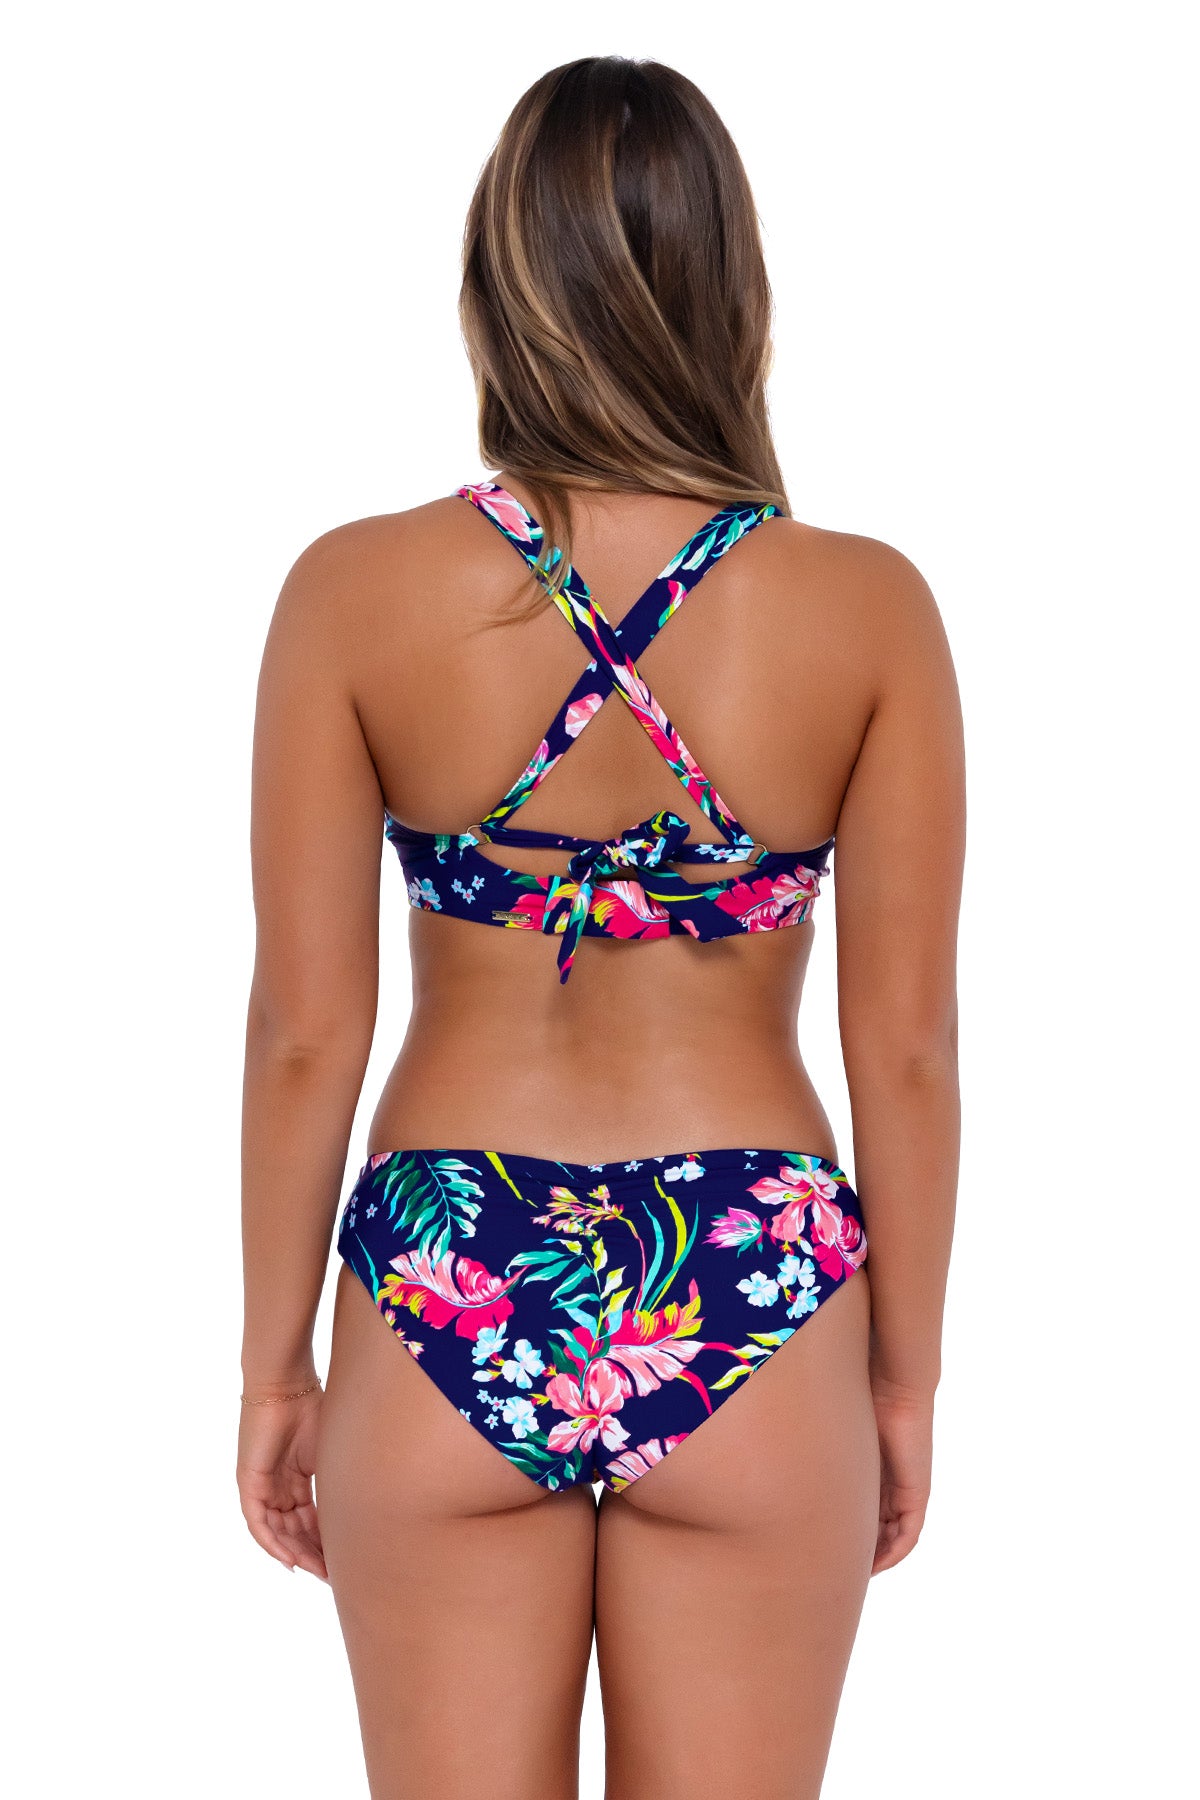 Back pose #1 of Taylor wearing Sunsets Island Getaway Vienna V-Wire Top showing crossback straps with matching Alana Reversible Hipster bikini bottom